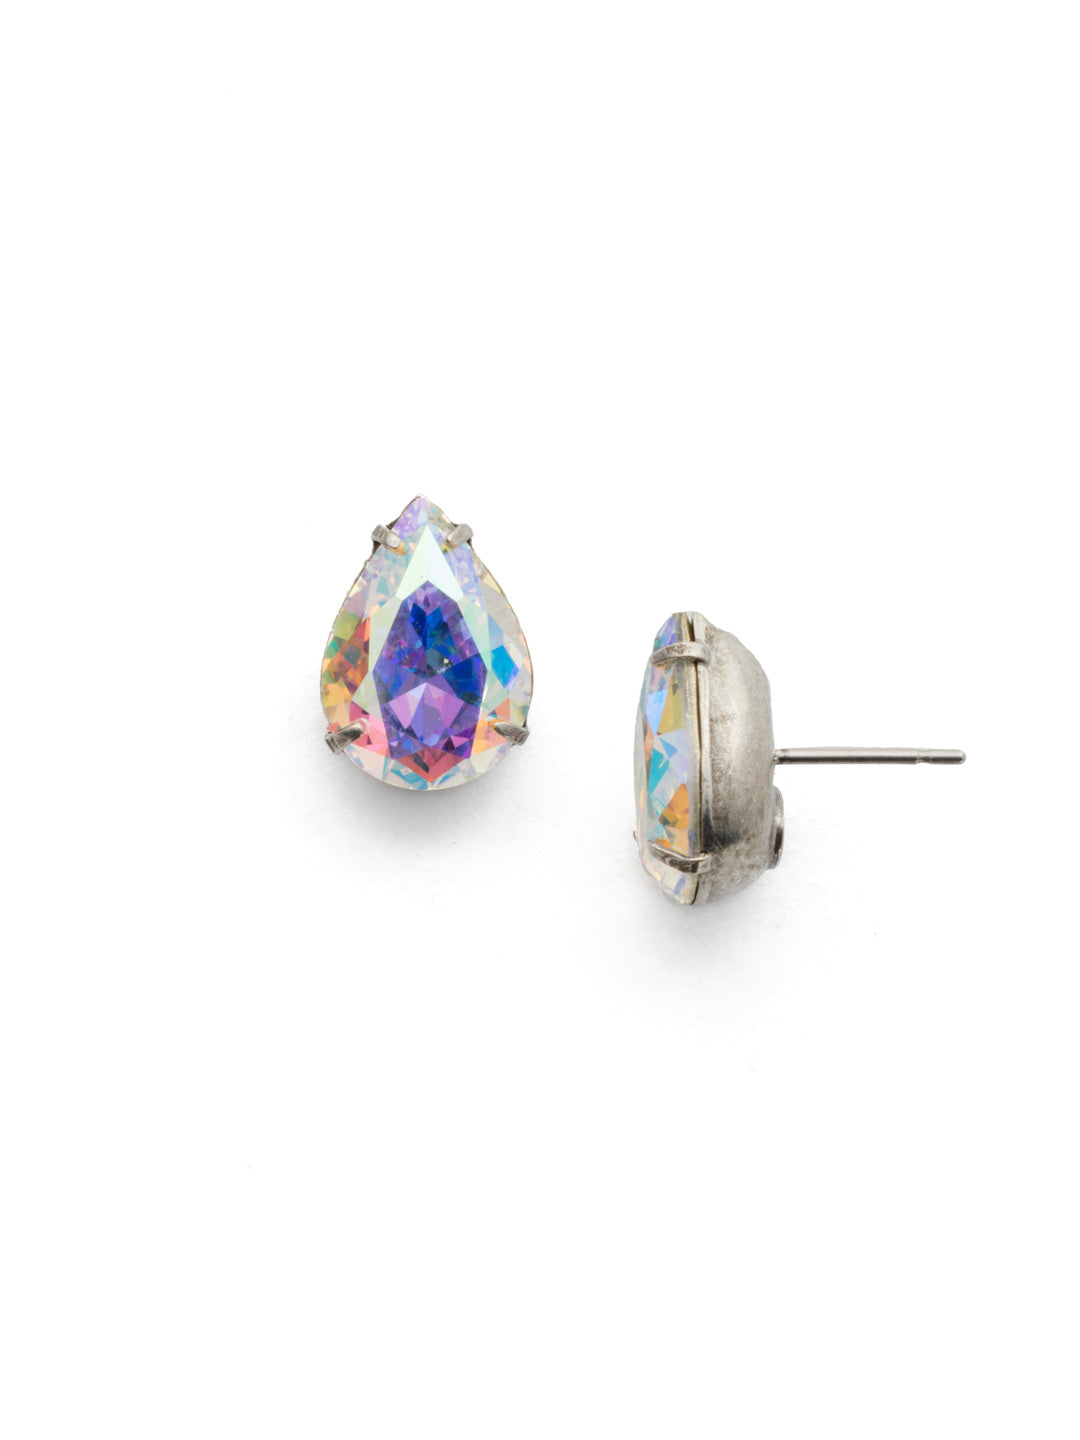 Ginnie Stud Earrings - ECR115ASPMU - <p>A beautiful basic stud. These classic single teardrop post earrings are perfect for any occasion, especially the everyday look. A timeless treasure that will sparkle season after season. From Sorrelli's Pink Mutiny collection in our Antique Silver-tone finish.</p>